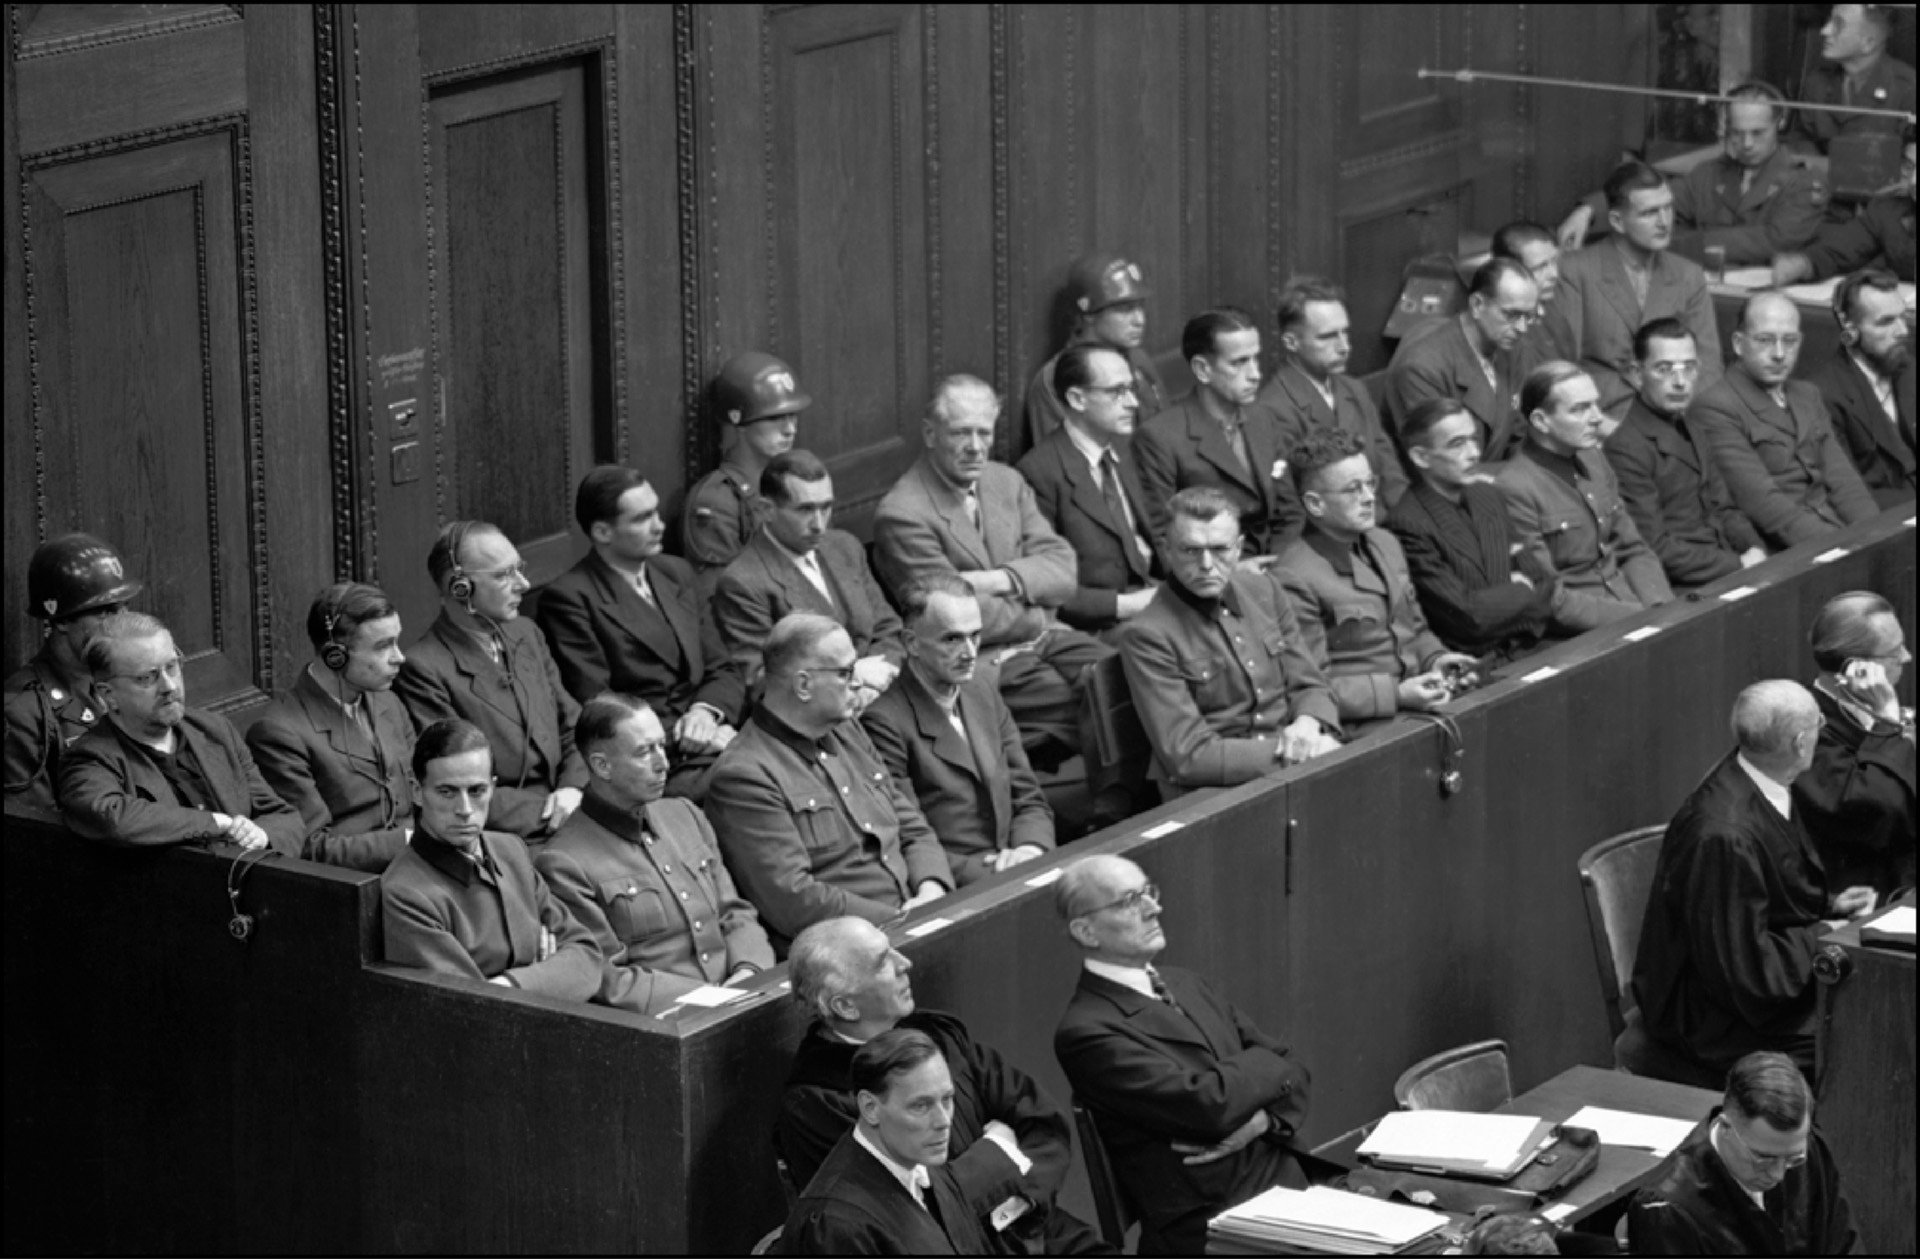 The Doctors’ Trial—one of 12 additional tribunals—involved Nazi doctors and officials accused of performing heinous medical experiments on concentration camp inmates. SS General Dr. Karl Brandt, one of Hitler’s physicians, is at lower left.